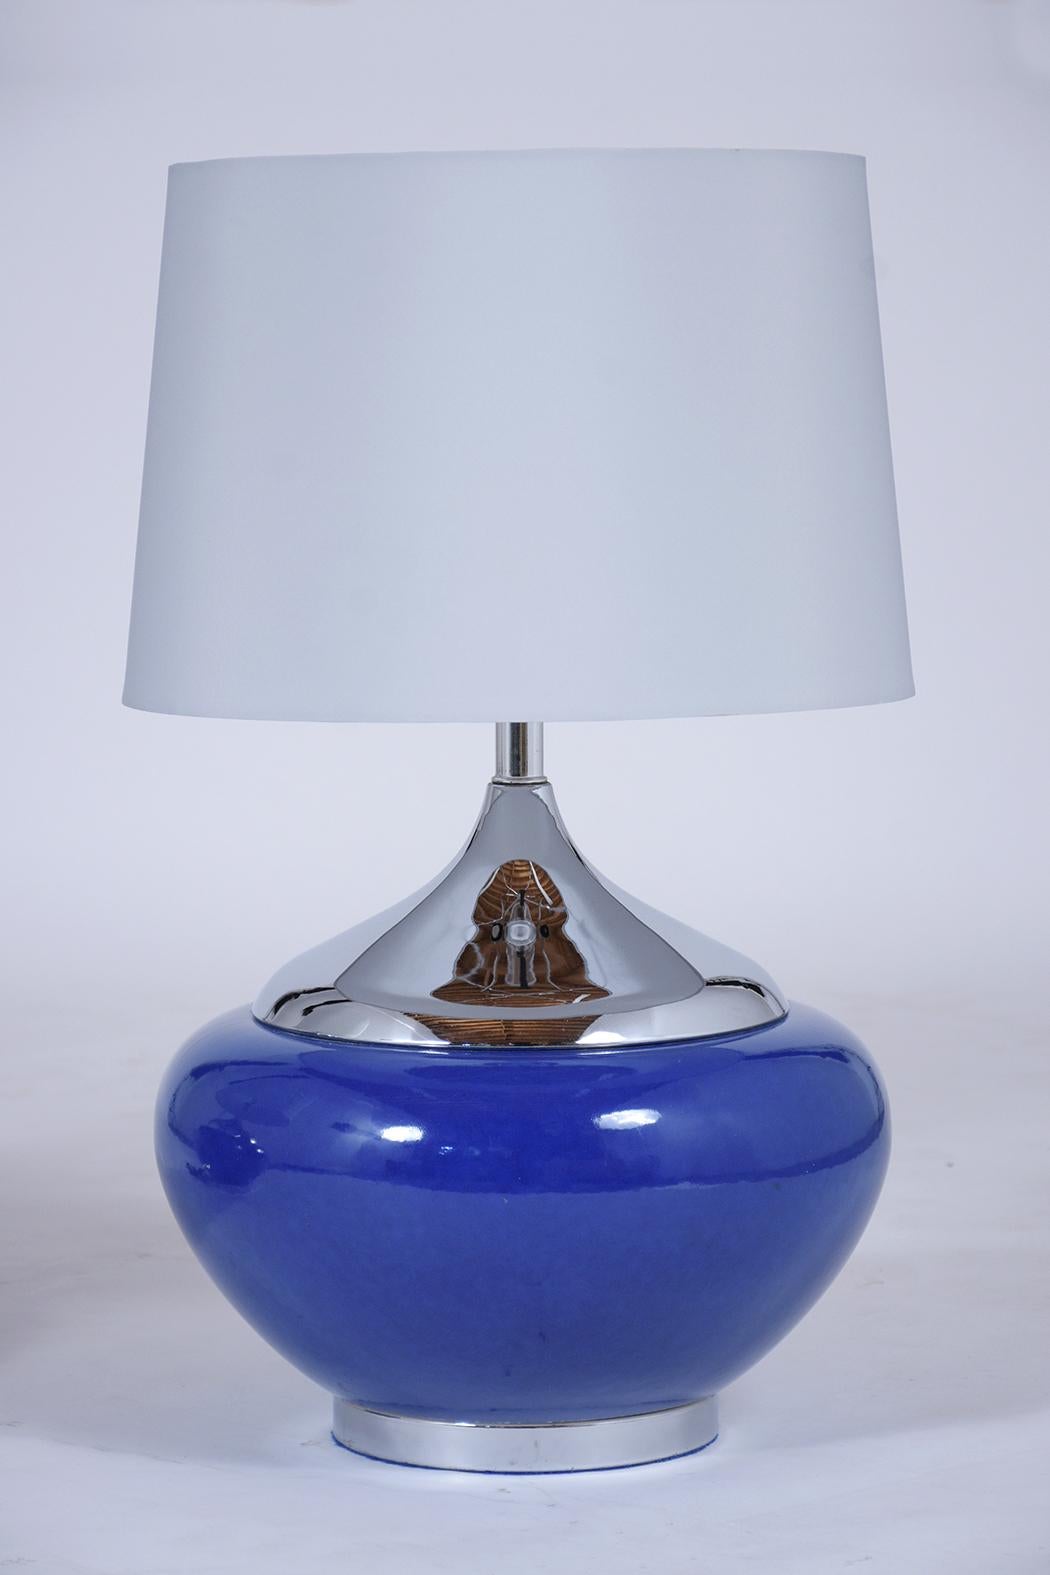 American Pair of Mid-Century Modern Blue Ceramic Table Lamps